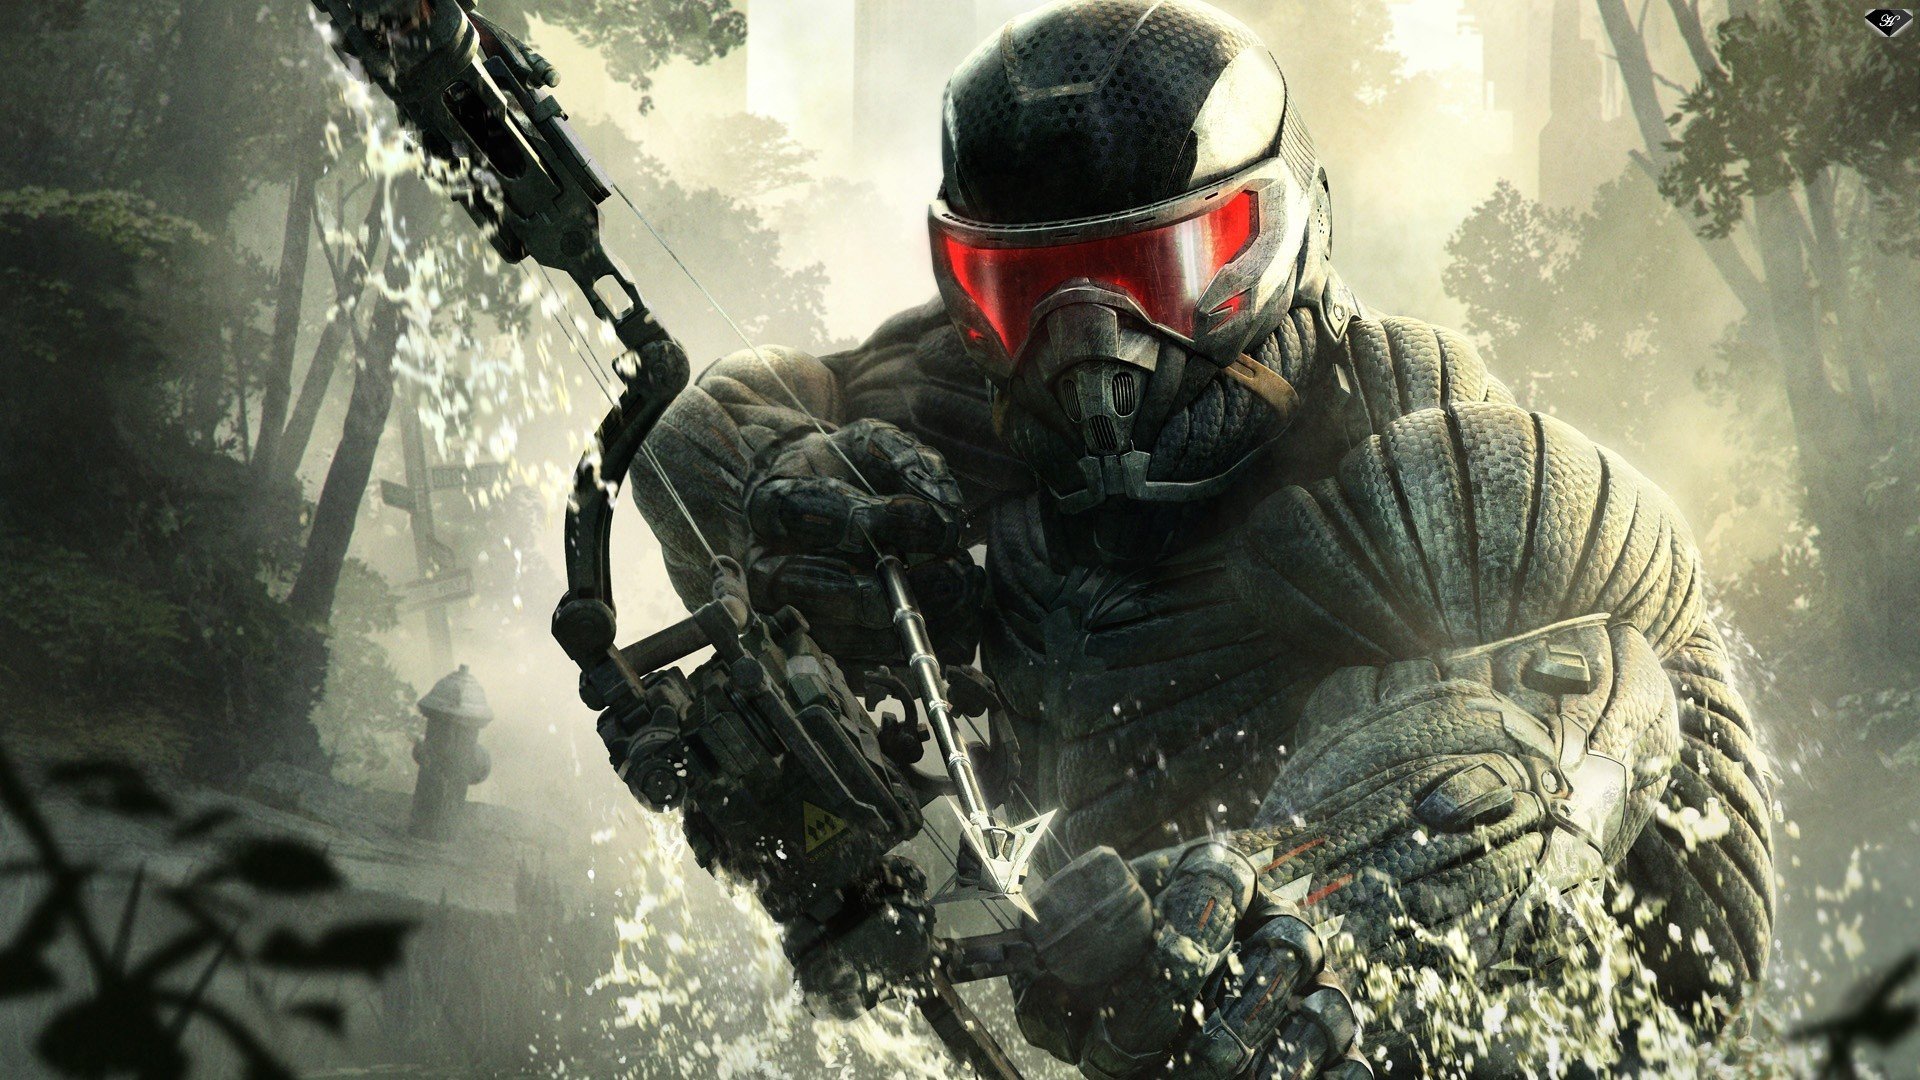 red eyes, Bow and arrow, Crysis, Crysis 3, Video games Wallpaper